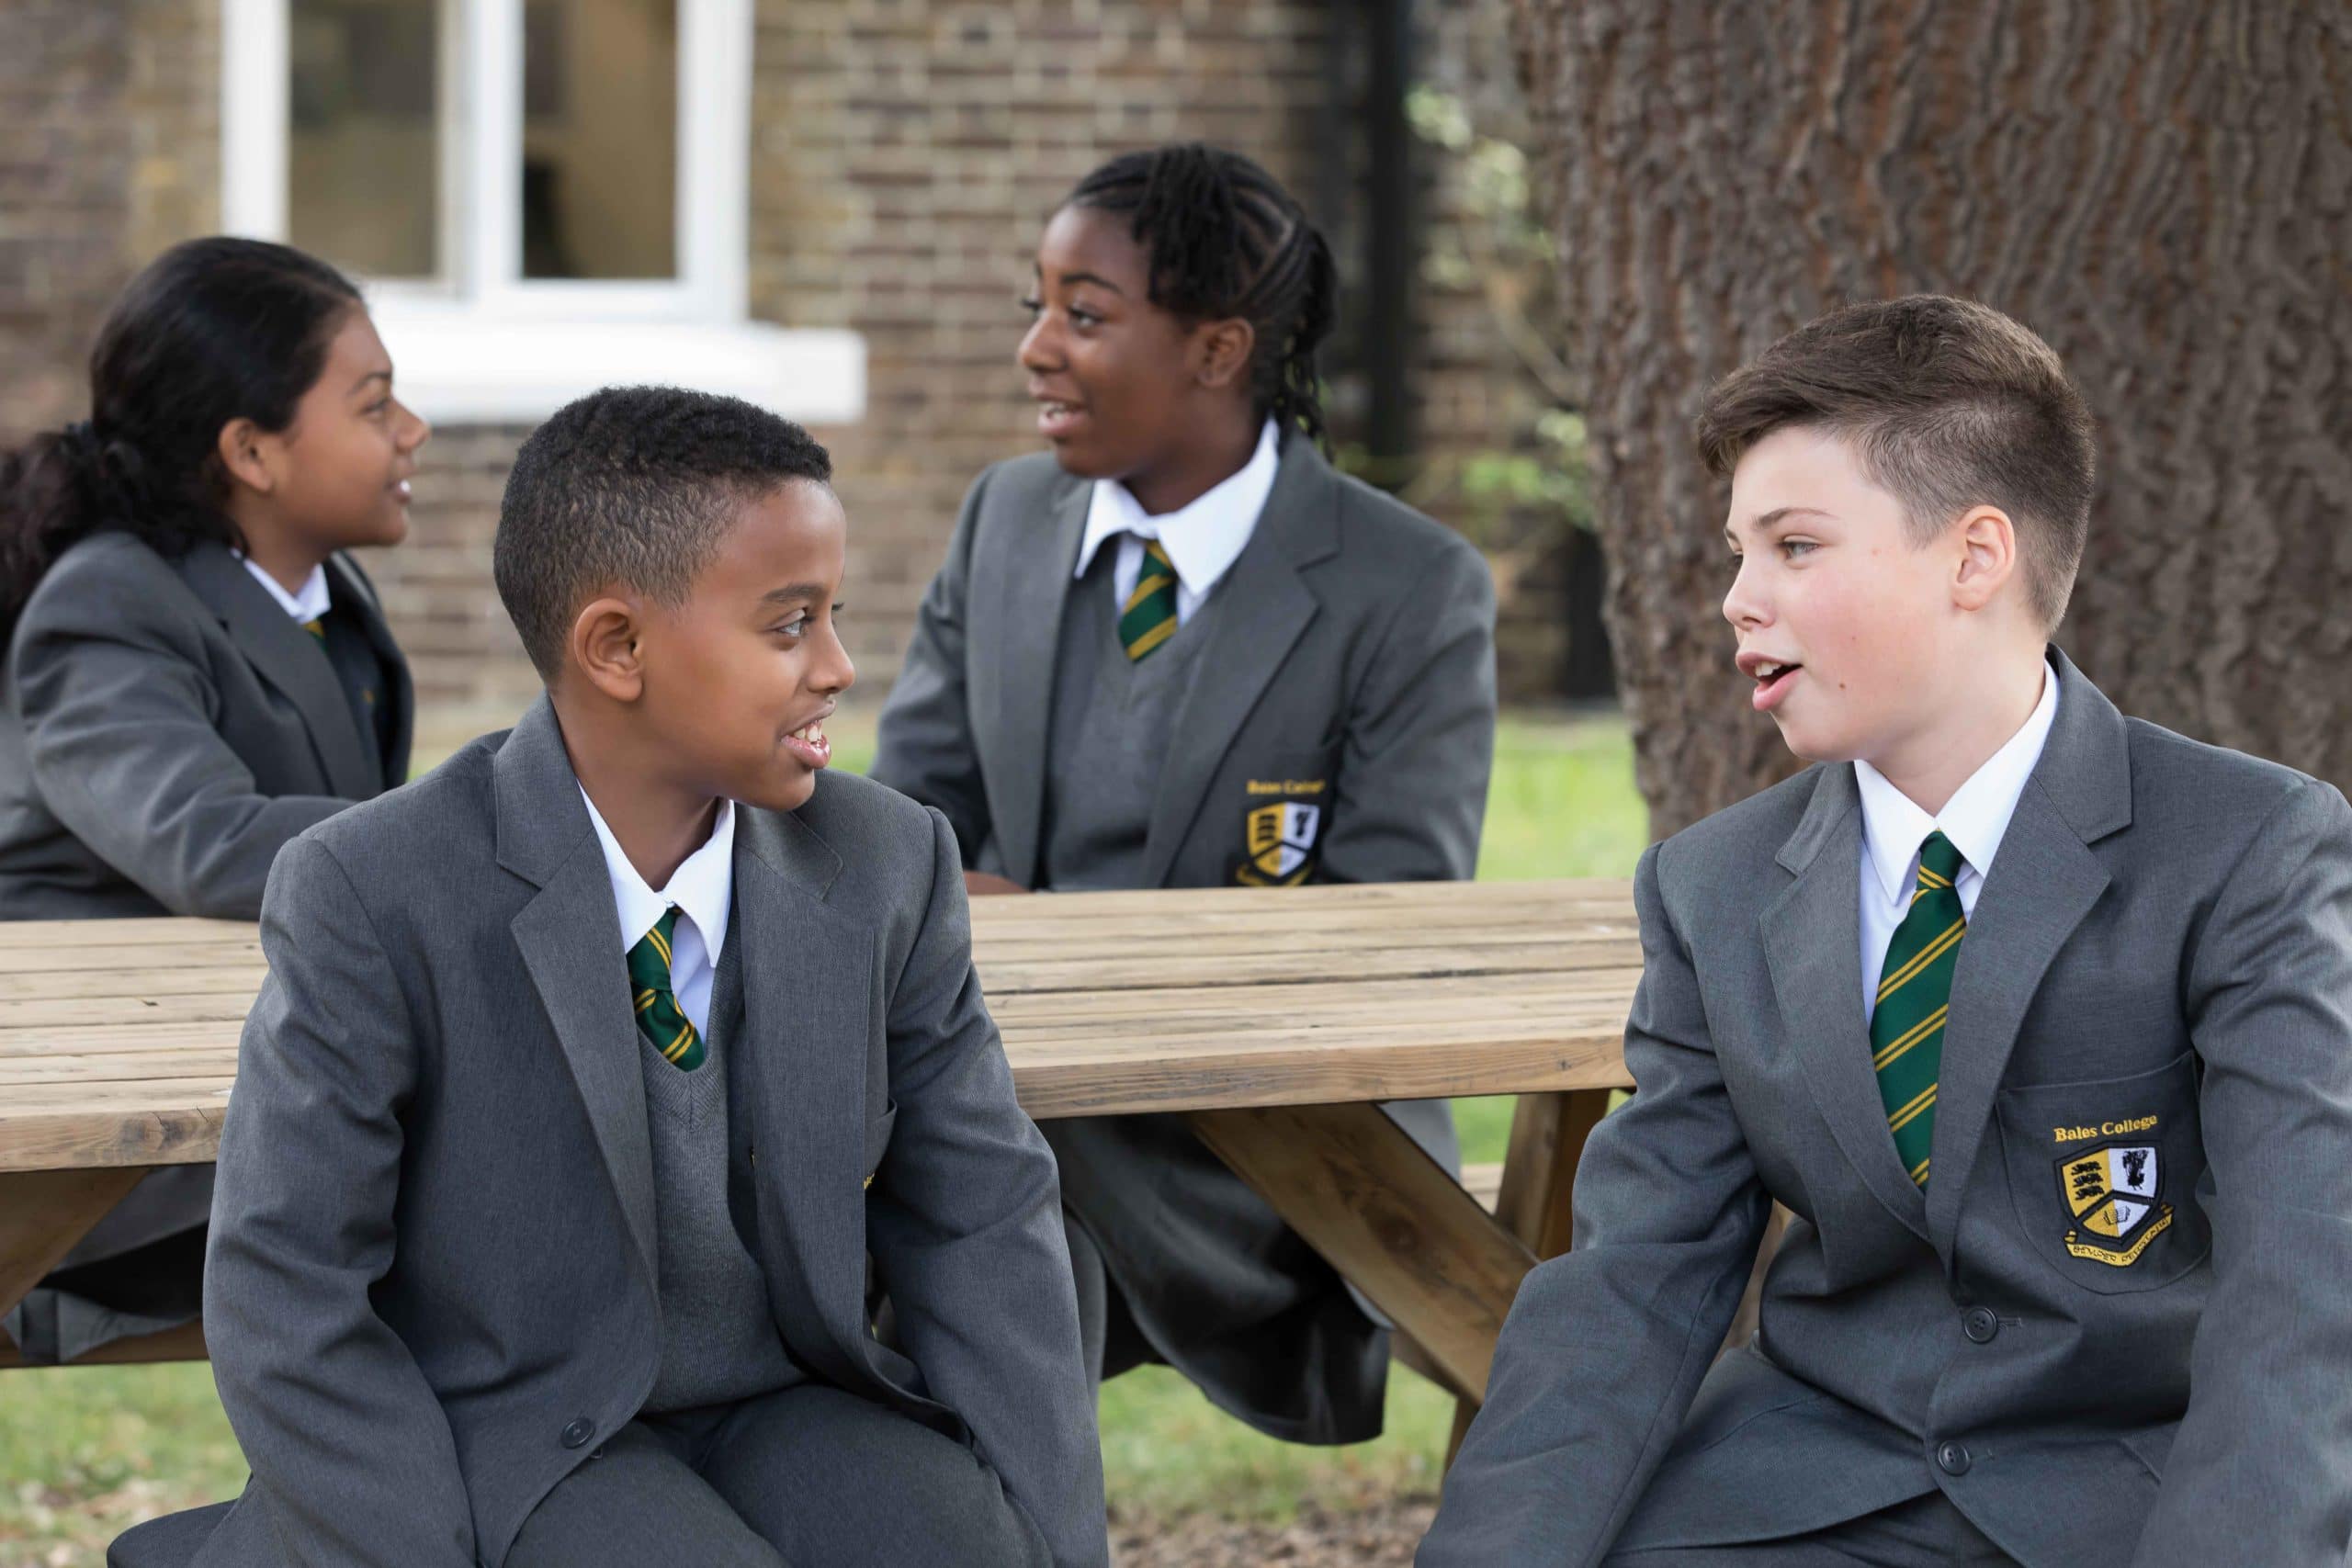 Private Independent School in Central London - Bales College